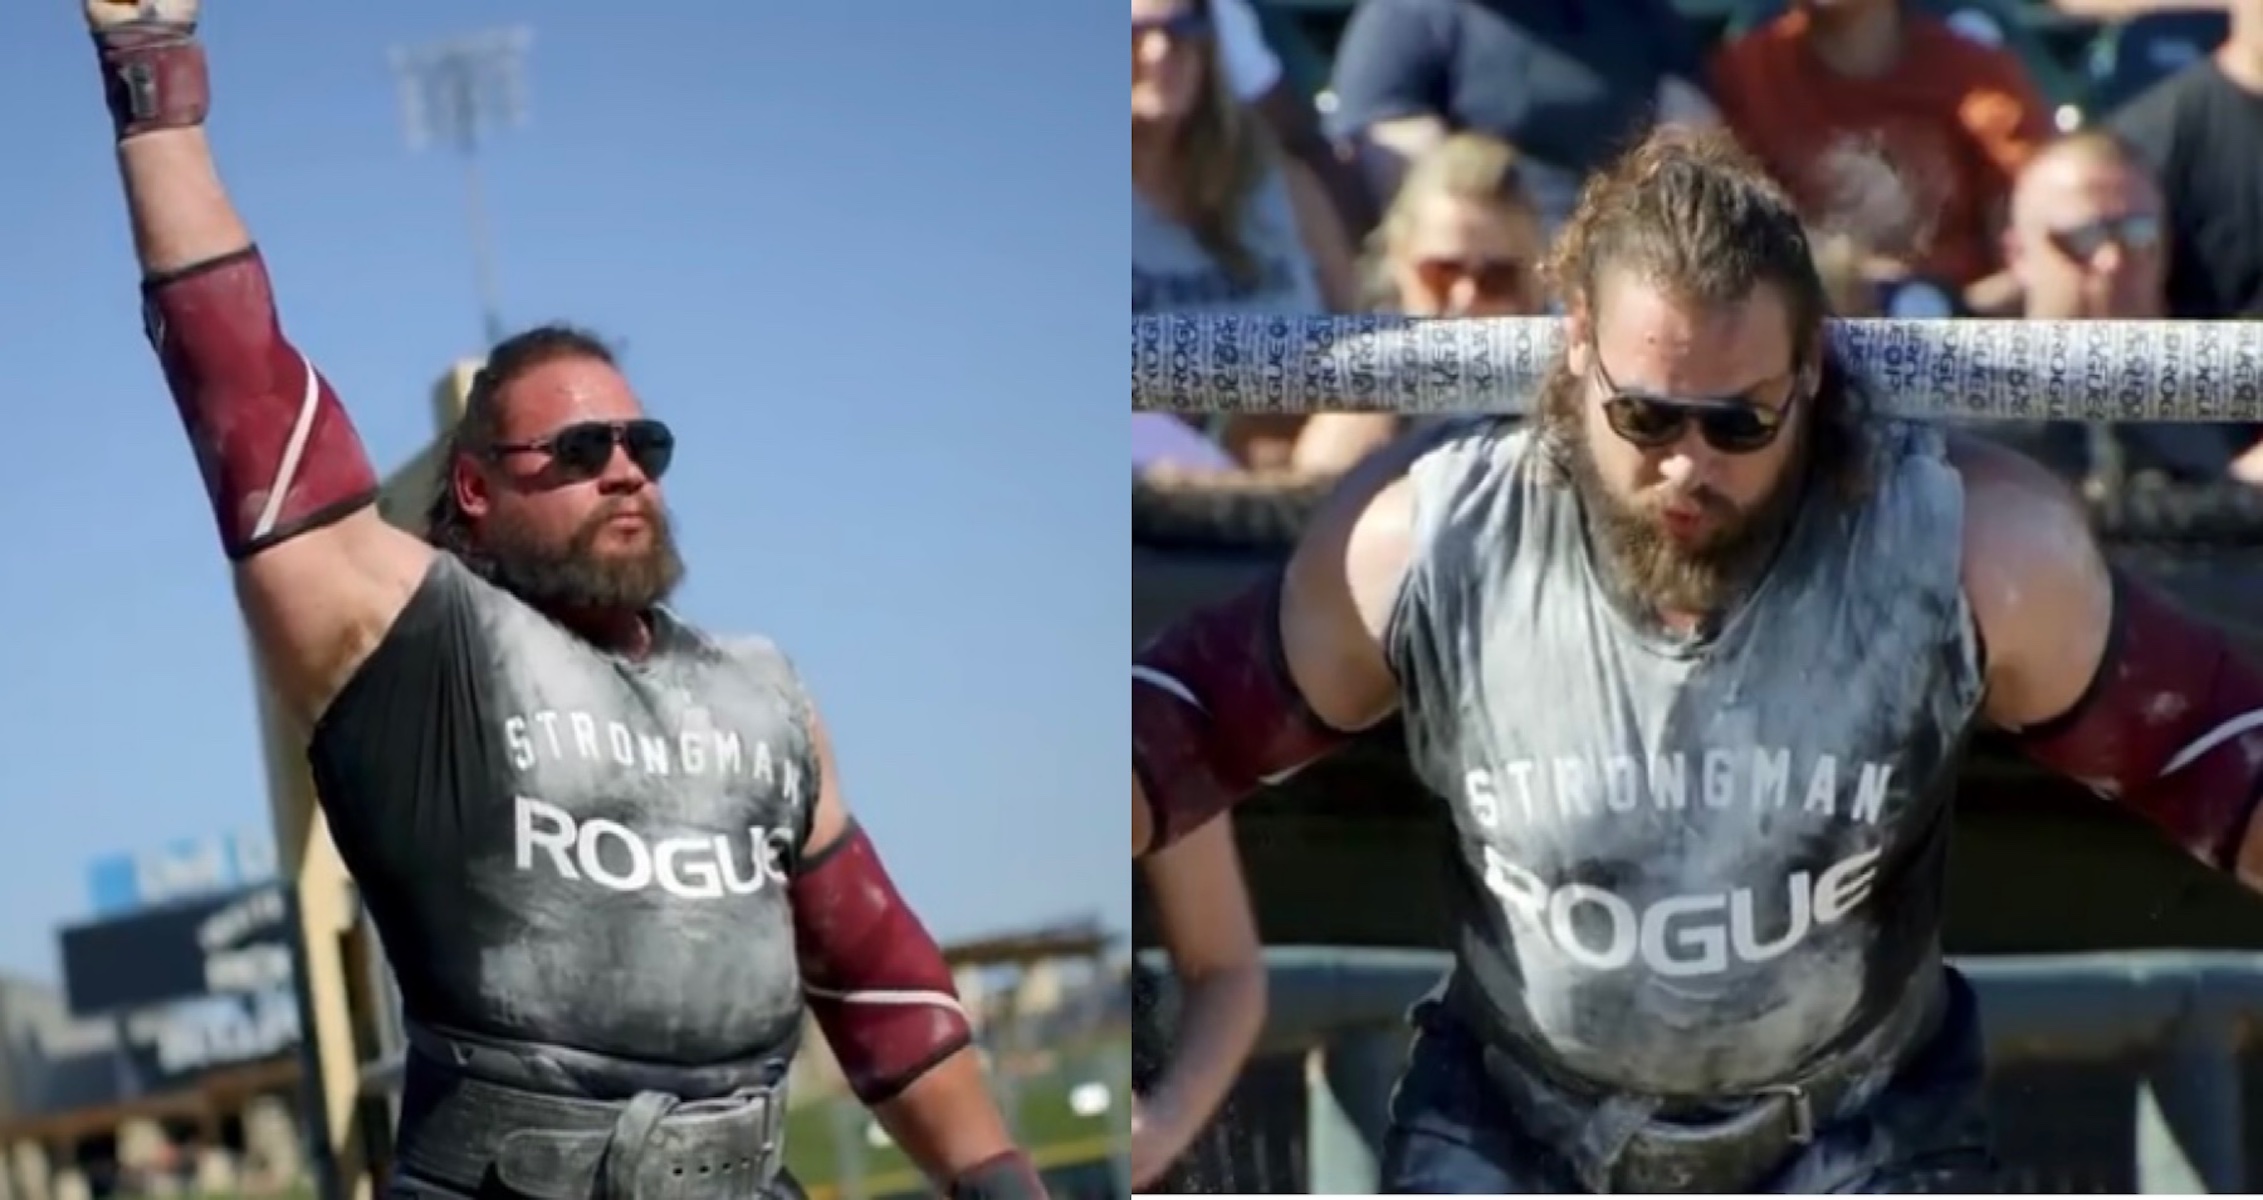 2021 Rogue Invitational Strongman Contest: Martins Licis Finishes As Champion